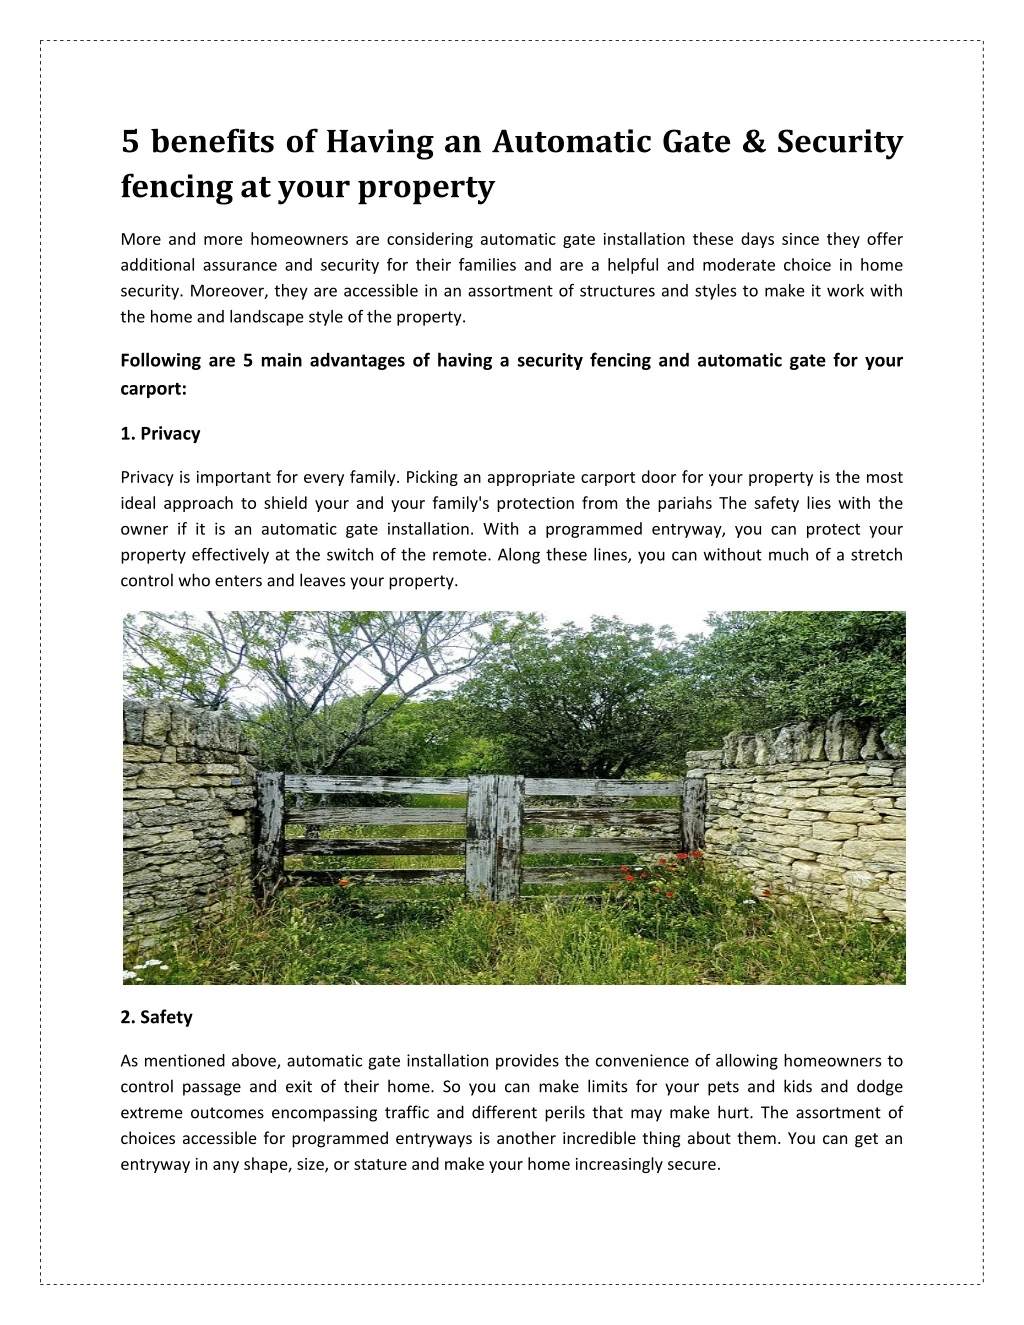 5 benefits of having an automatic gate security